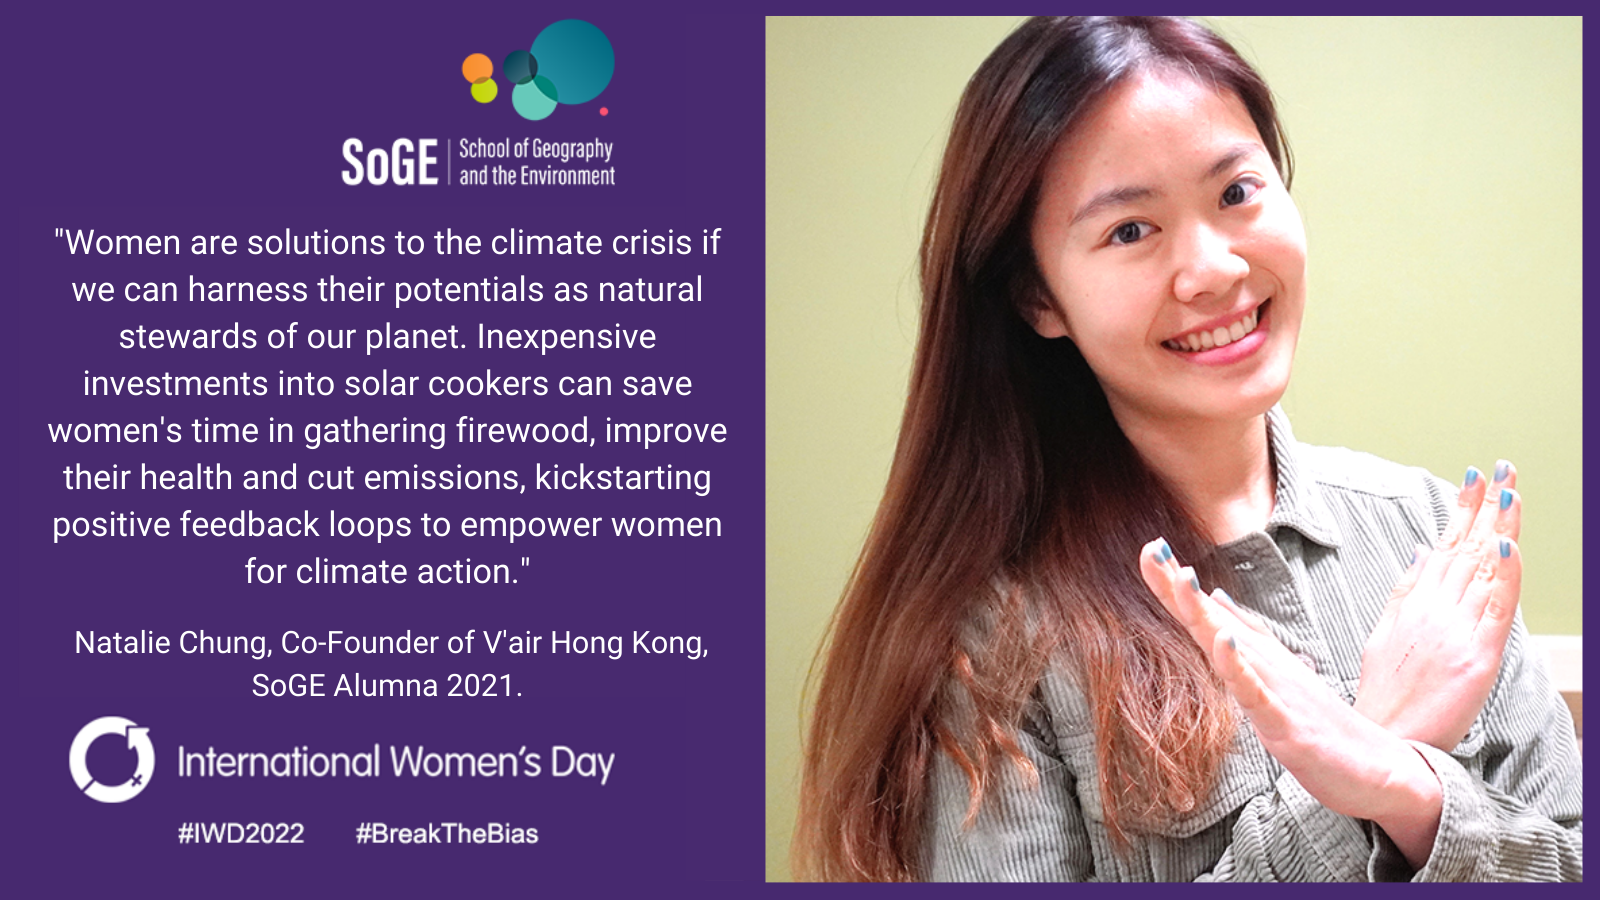 'Women are solutions to the climate crisis if we can harness their potentials as natural stewards of our planet. Inexpensive investments into solar cookers can save women's time in gathering firewood, improve their health and cut emissions, kickstarting positive feedback loops to empower women for climate action.' Natalie Chung, Co-Founder of V'air Hong Kong, SoGE Alumna 2021.